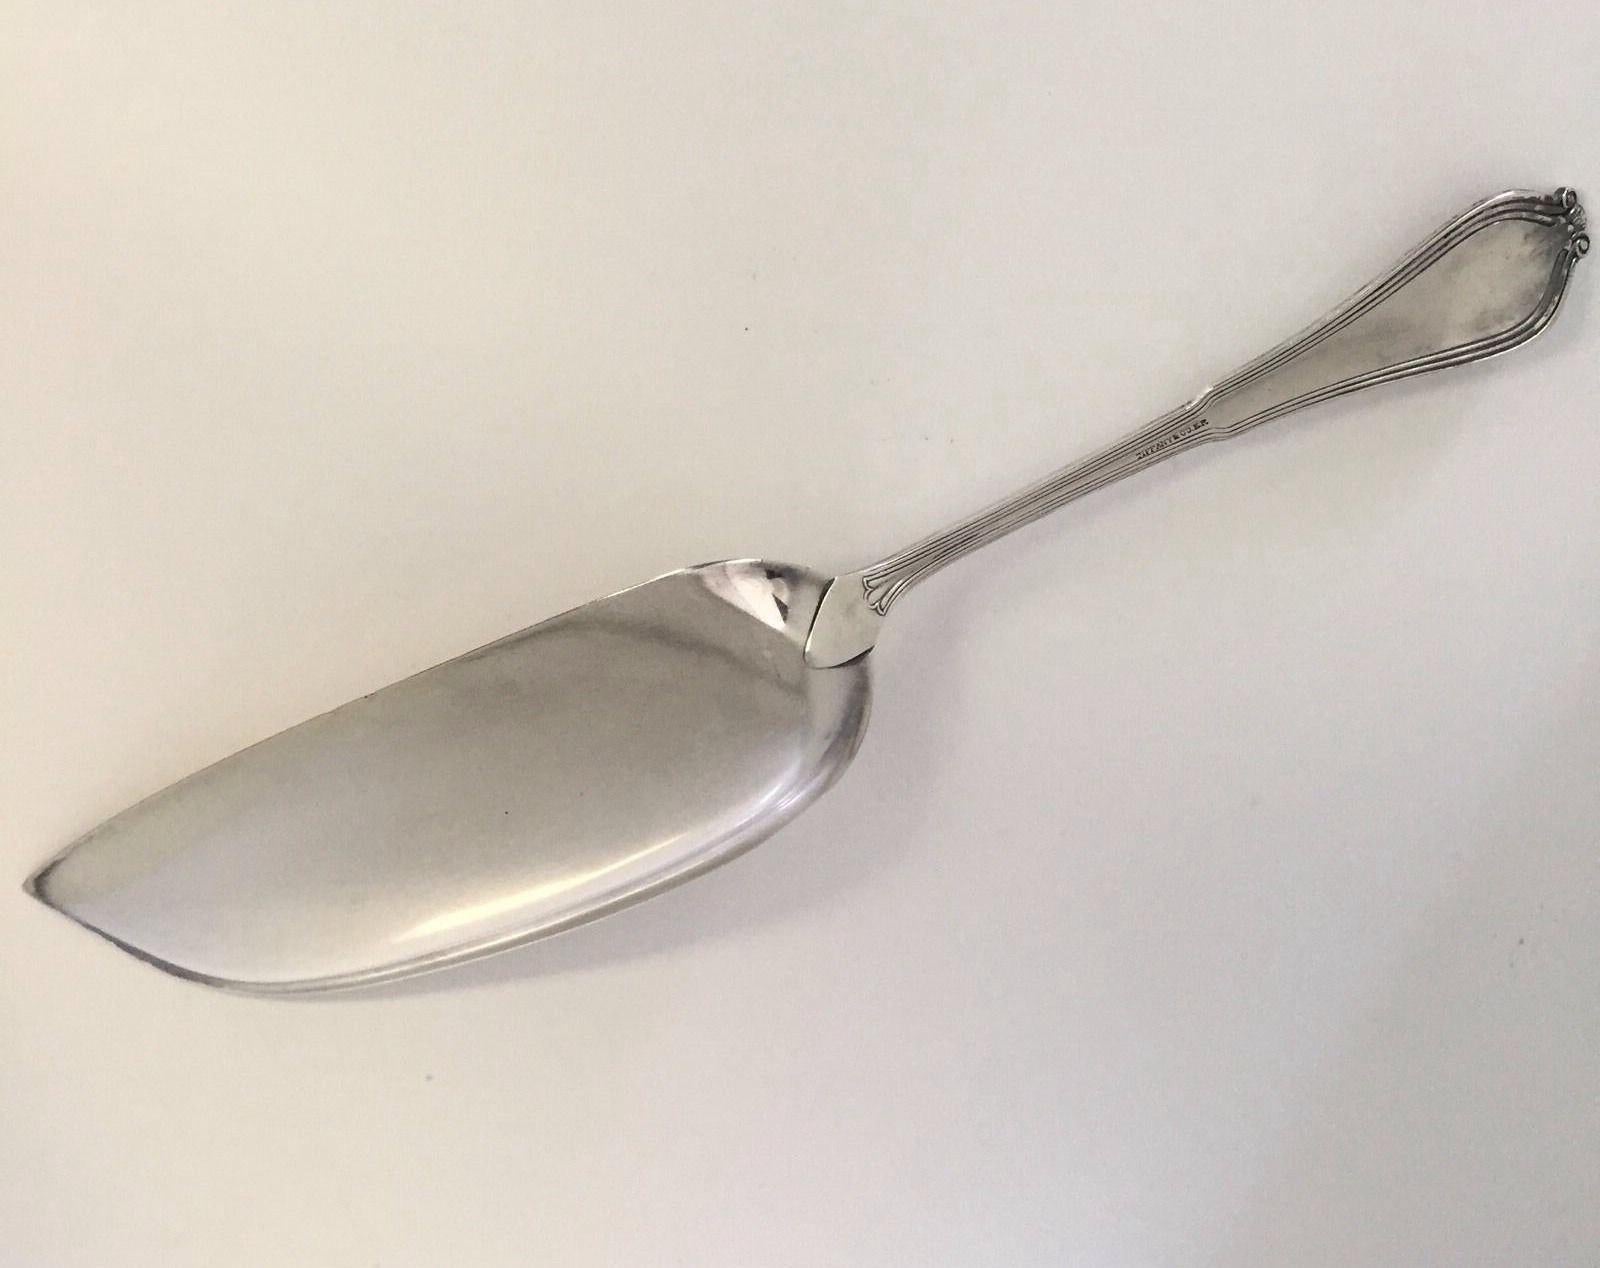 Tiffany & Co. silver plated EP large flat handle crumb knife/ crumber. 
In this Whittier 1907 pattern. 
Monogram of DB. 
Marked: TIFFANY & CO. E.P. 
Measures: 13 1/8